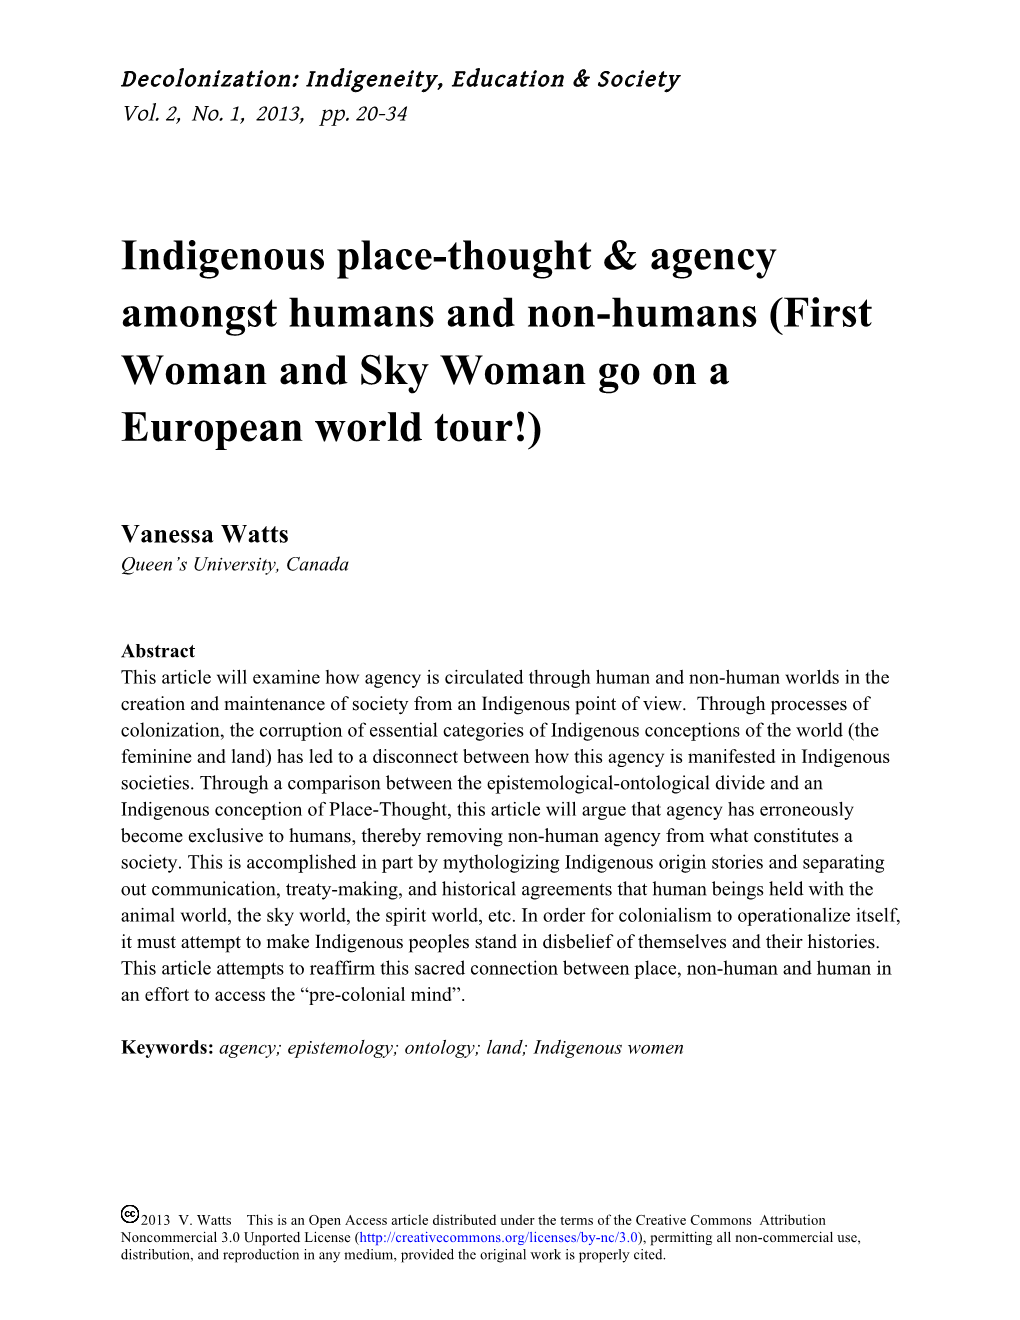 Indigenous Place-Thought & Agency Amongst Humans and Non-Humans